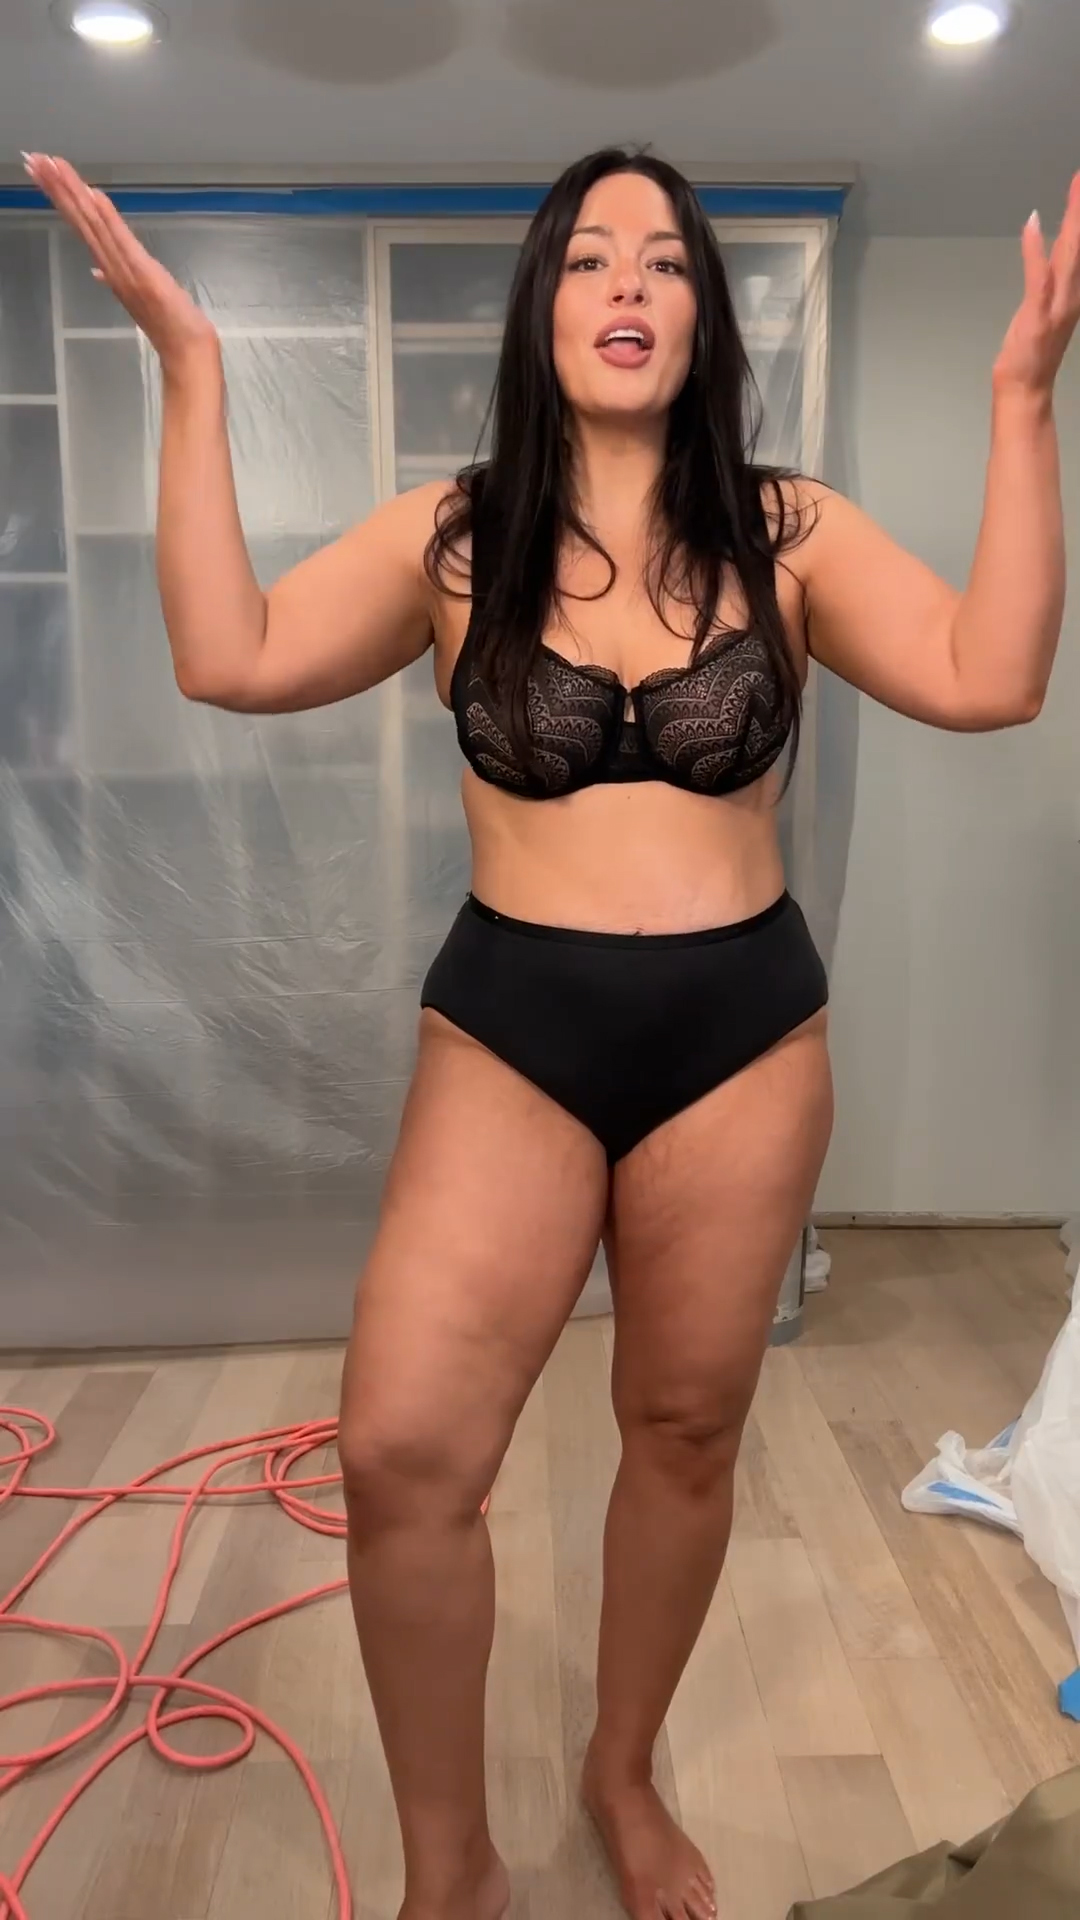 Ashley has been showing off in black lingerie